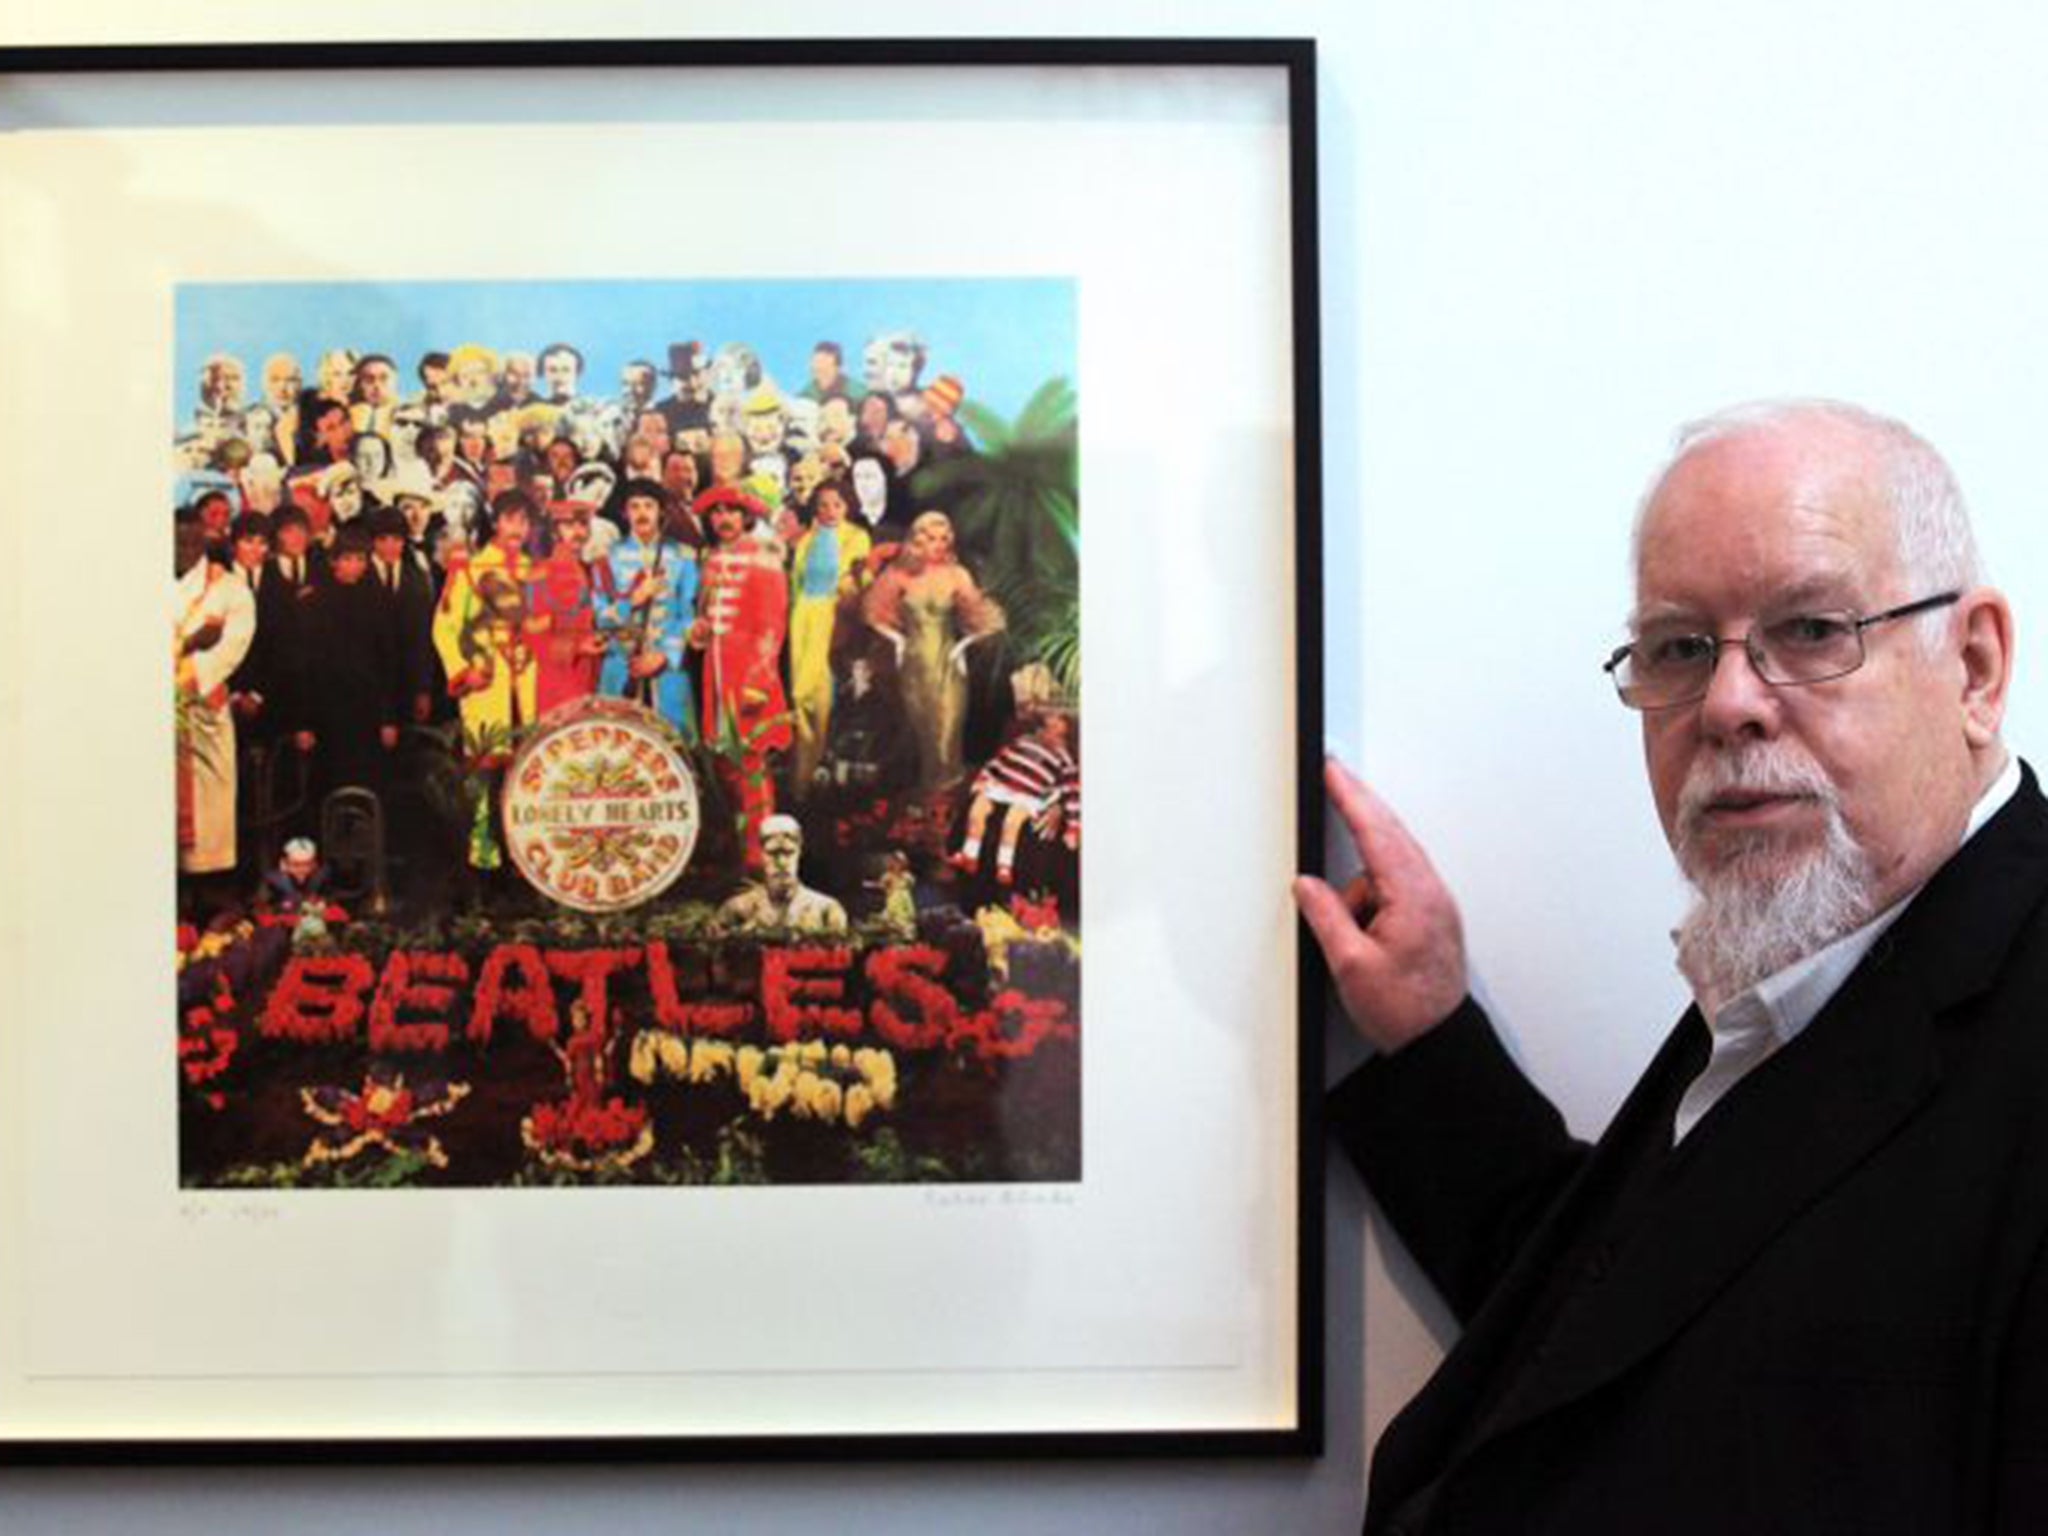 Perhaps Peter Blake's best known work is the cover of the Beatles’ Sgt Pepper album